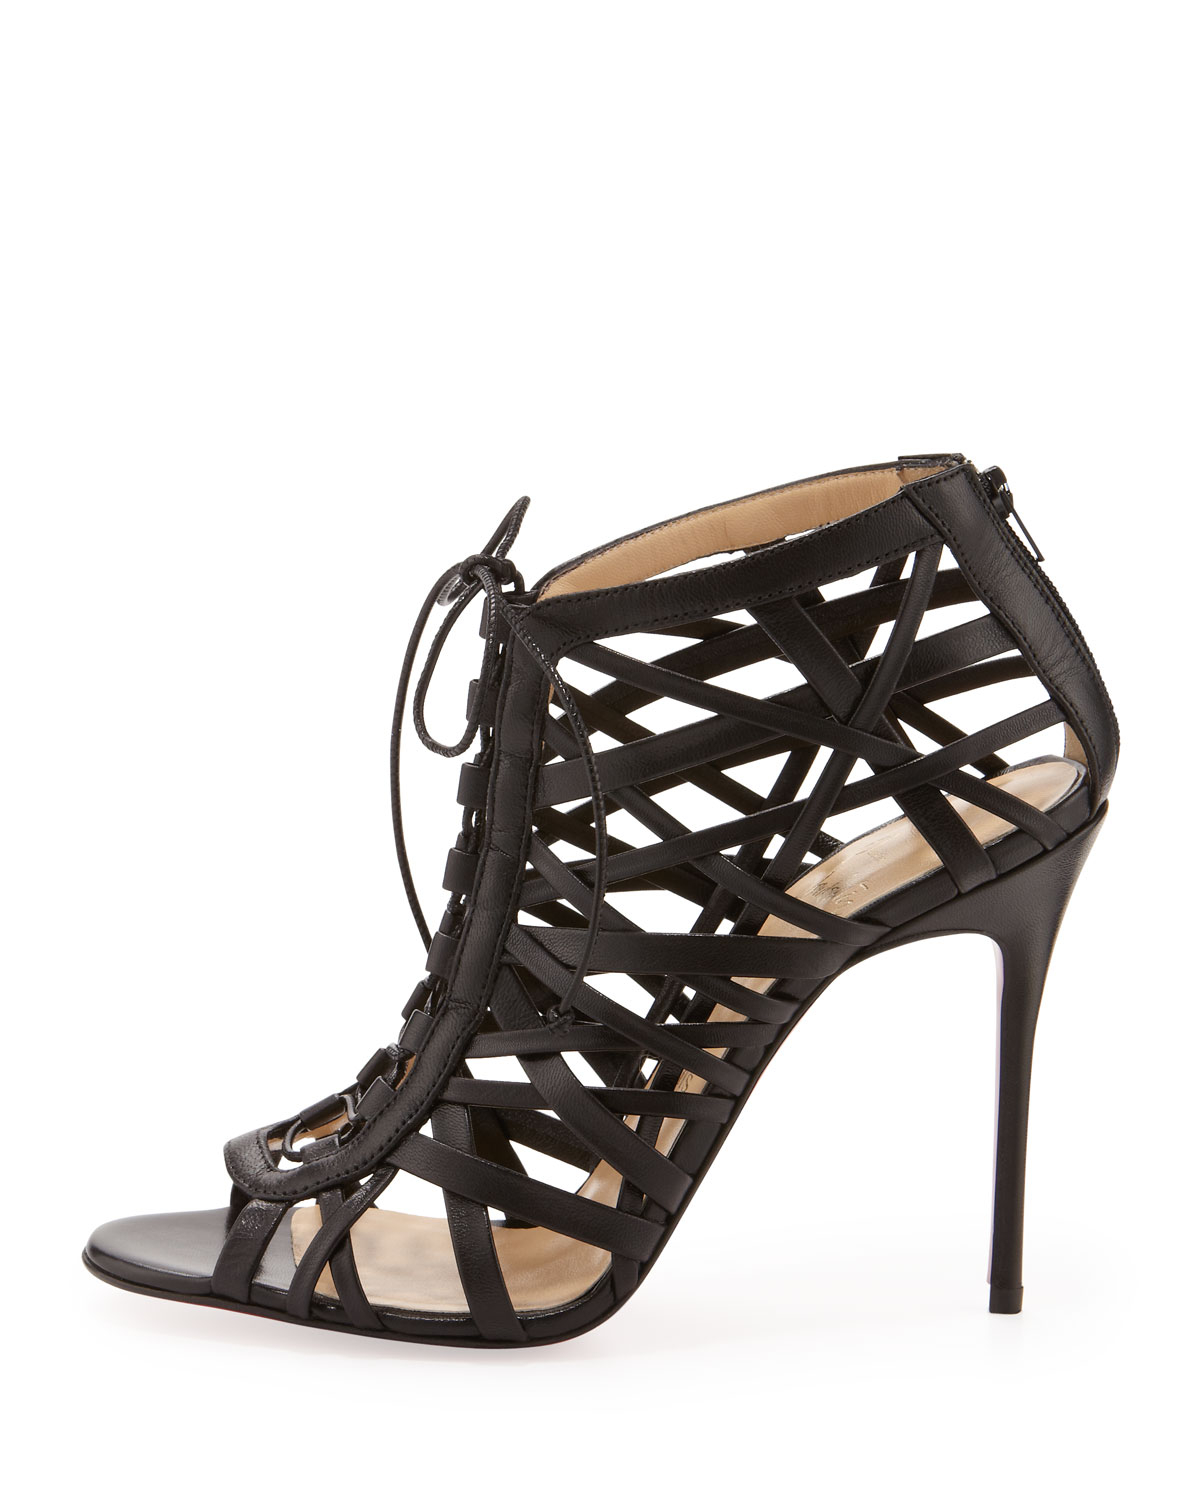 christian louboutin shoes on sale - christian louboutin leather gladiator sandals Black lace-up front ...